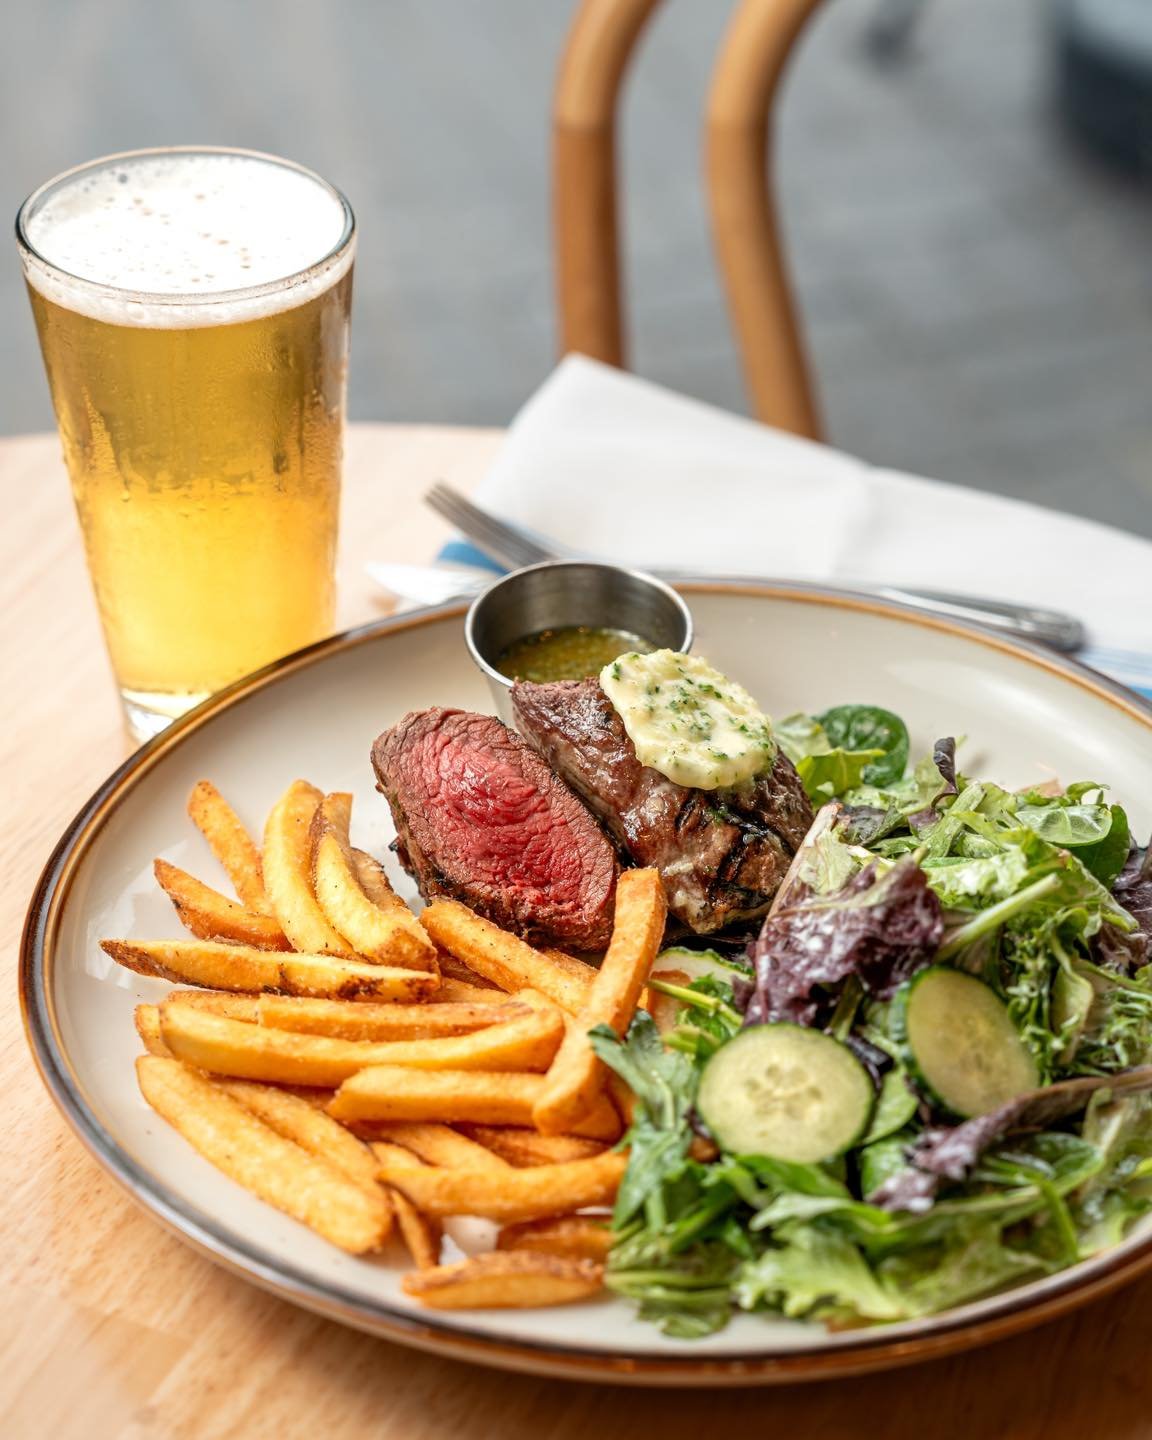 We've refreshed our Steak Frites, and trust us, you're going to want to give this dish a try! 

We're using a very tender teres major cut, with a texture similar to a filet mignon. Topped with our Chef's Chevy Main Steakhouse Butter, our new Steak Fr